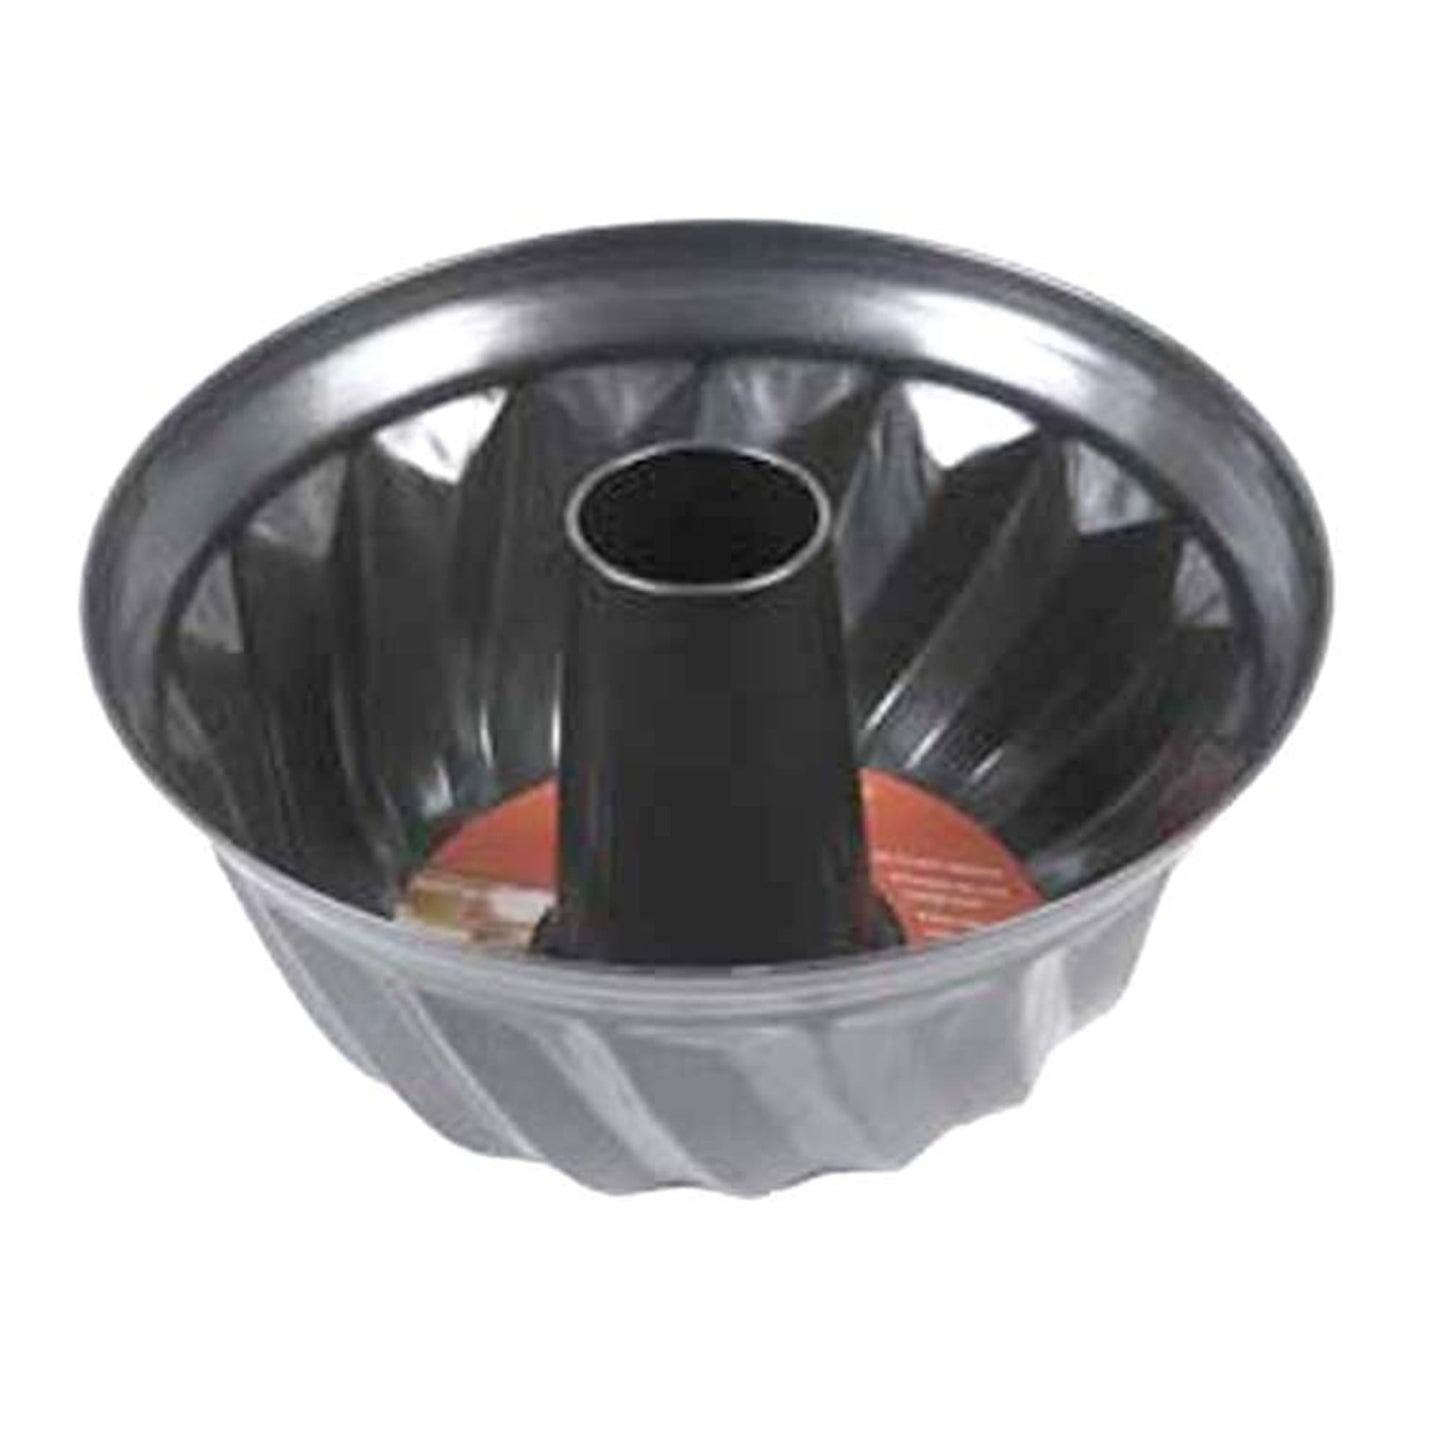 Non-Stick Fluted Cake Pan